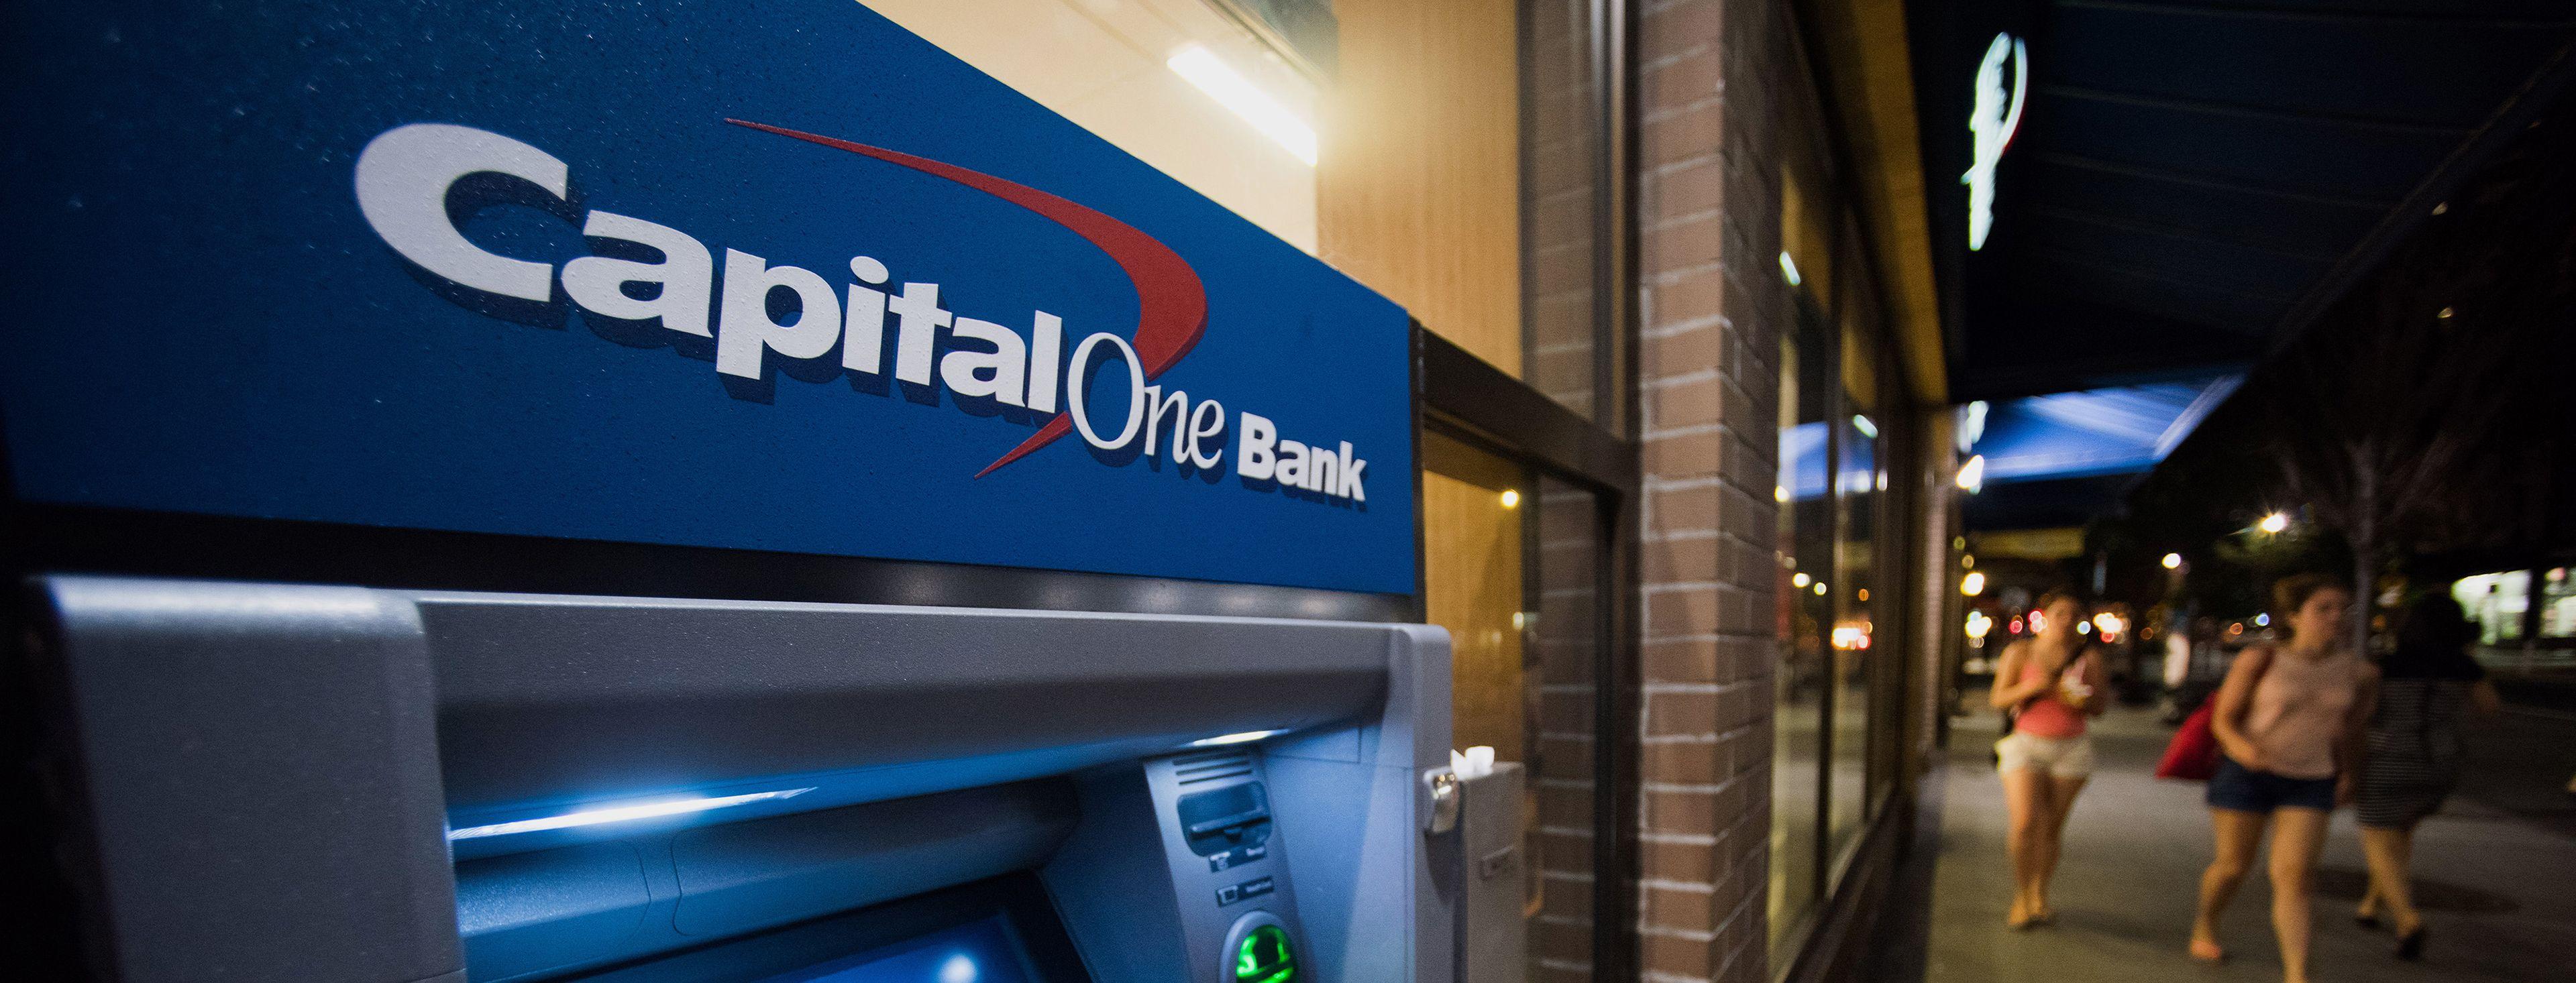 Capital One Financial Logo - Capital One Partners With Blockchain Firms on Health Care Claims ...